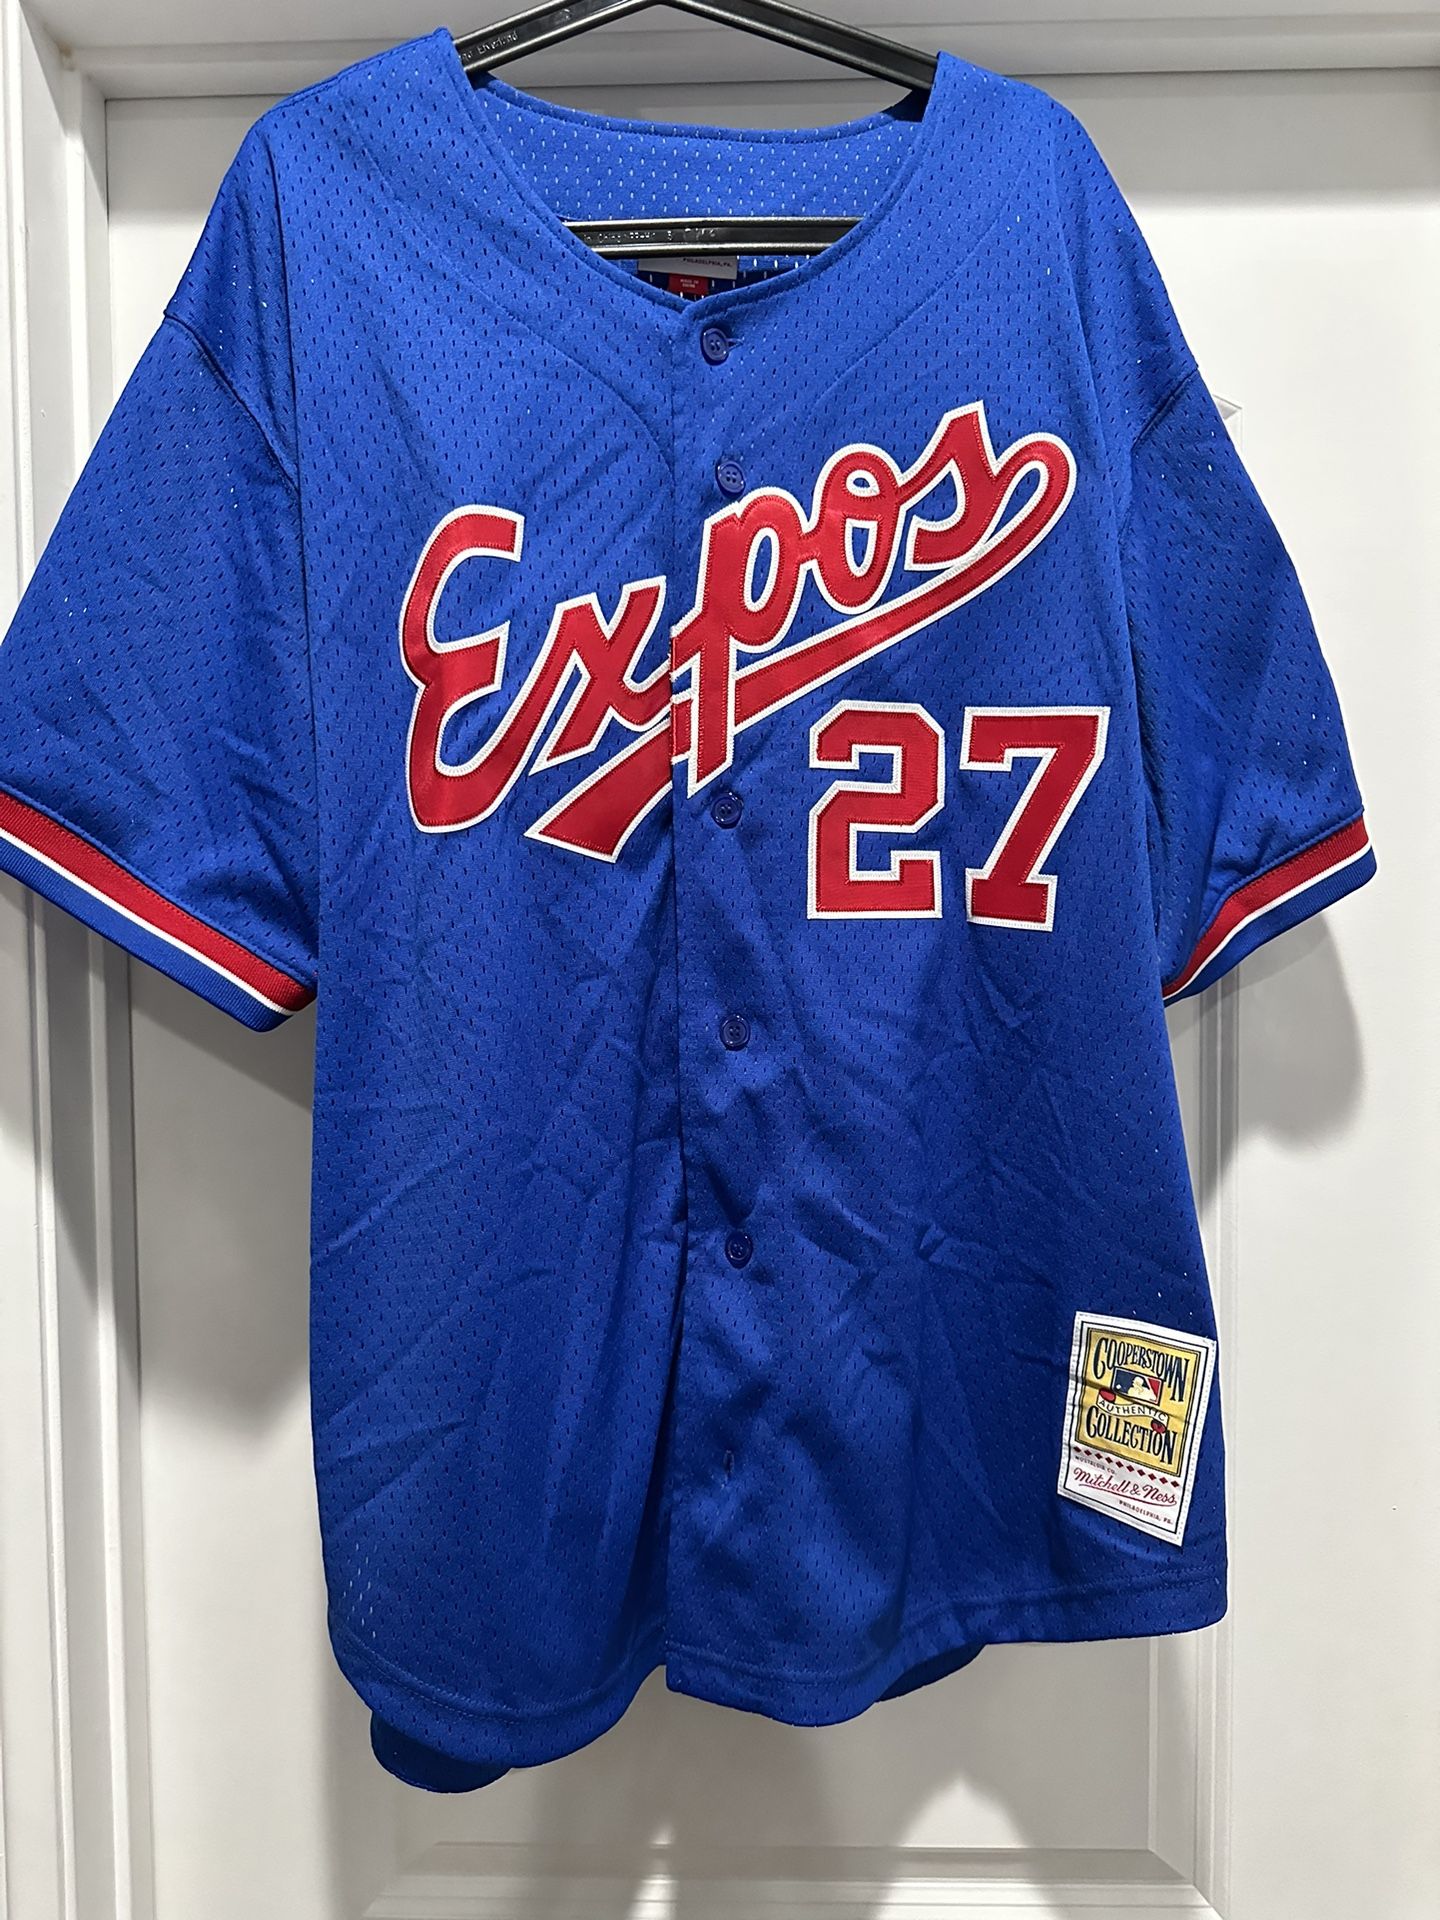 Expos Guerrero Mitchell N Ness BP Jersey NWT for Sale in Chula